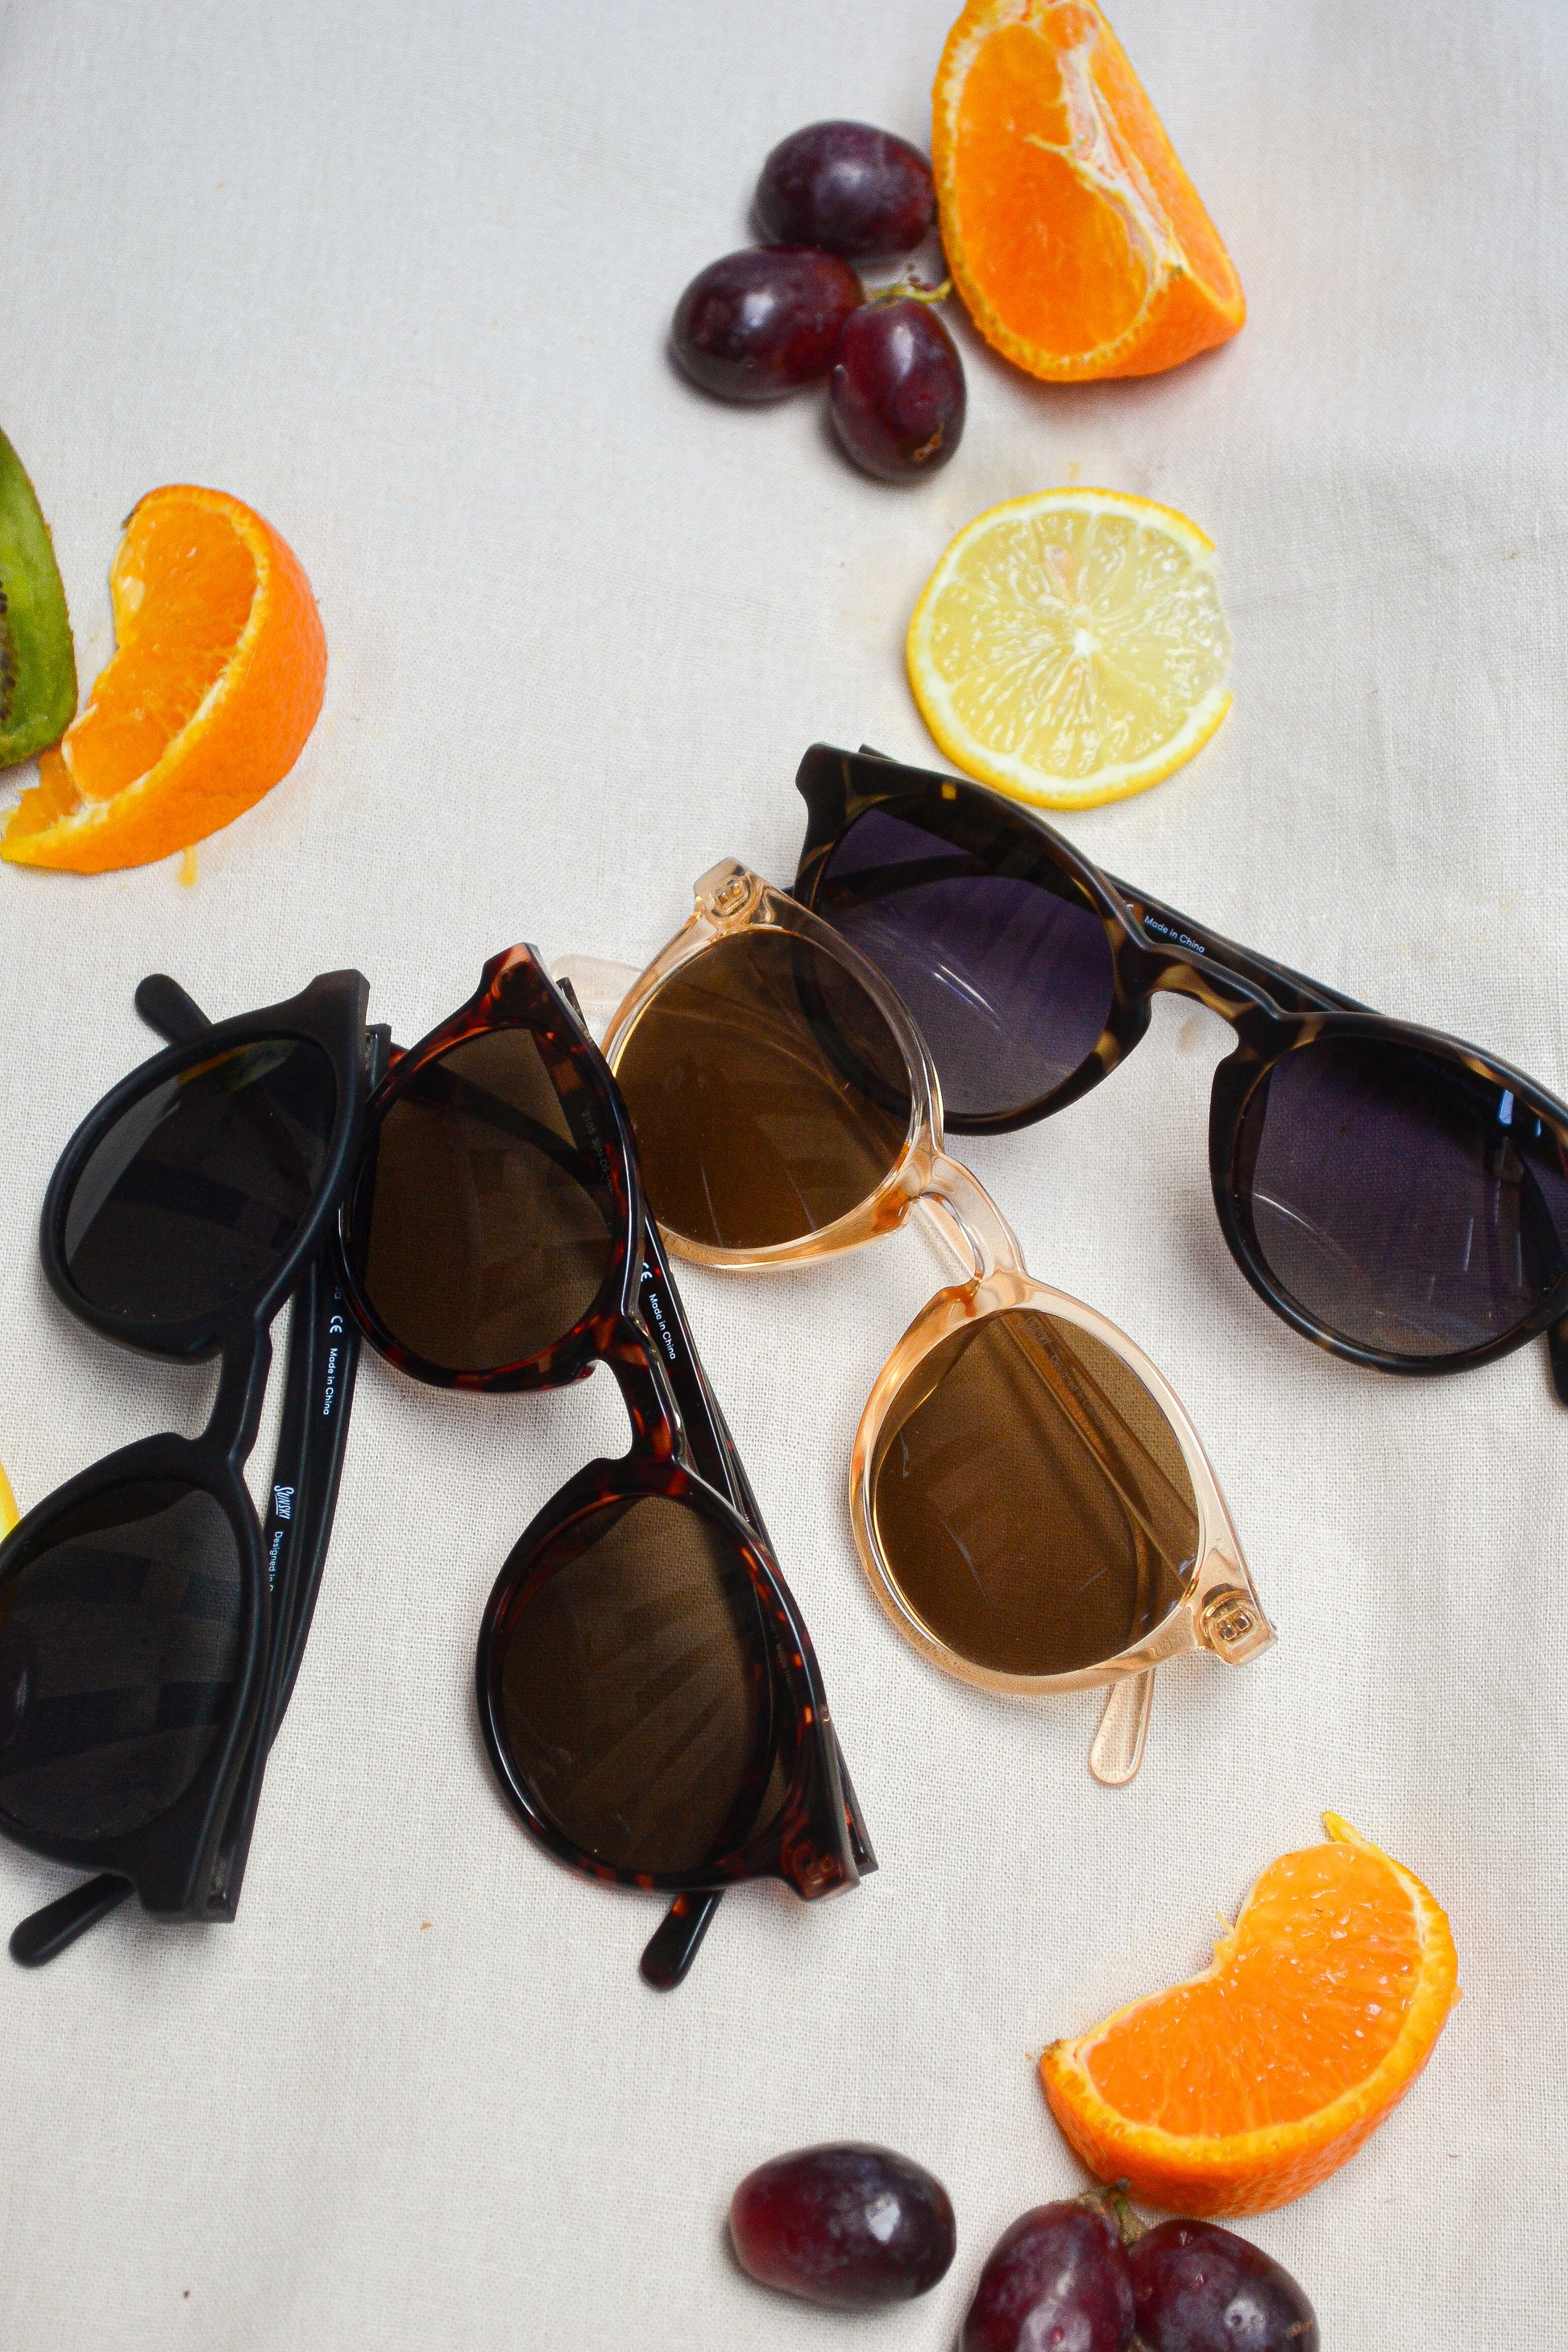 Eco-friendly polarized sunglasses made from recycled plastic. The Dispeas are a medium-coverage, medium-sized frame that works best on small to medium faces. Unisex, and rocked by guys and gals nationwide.